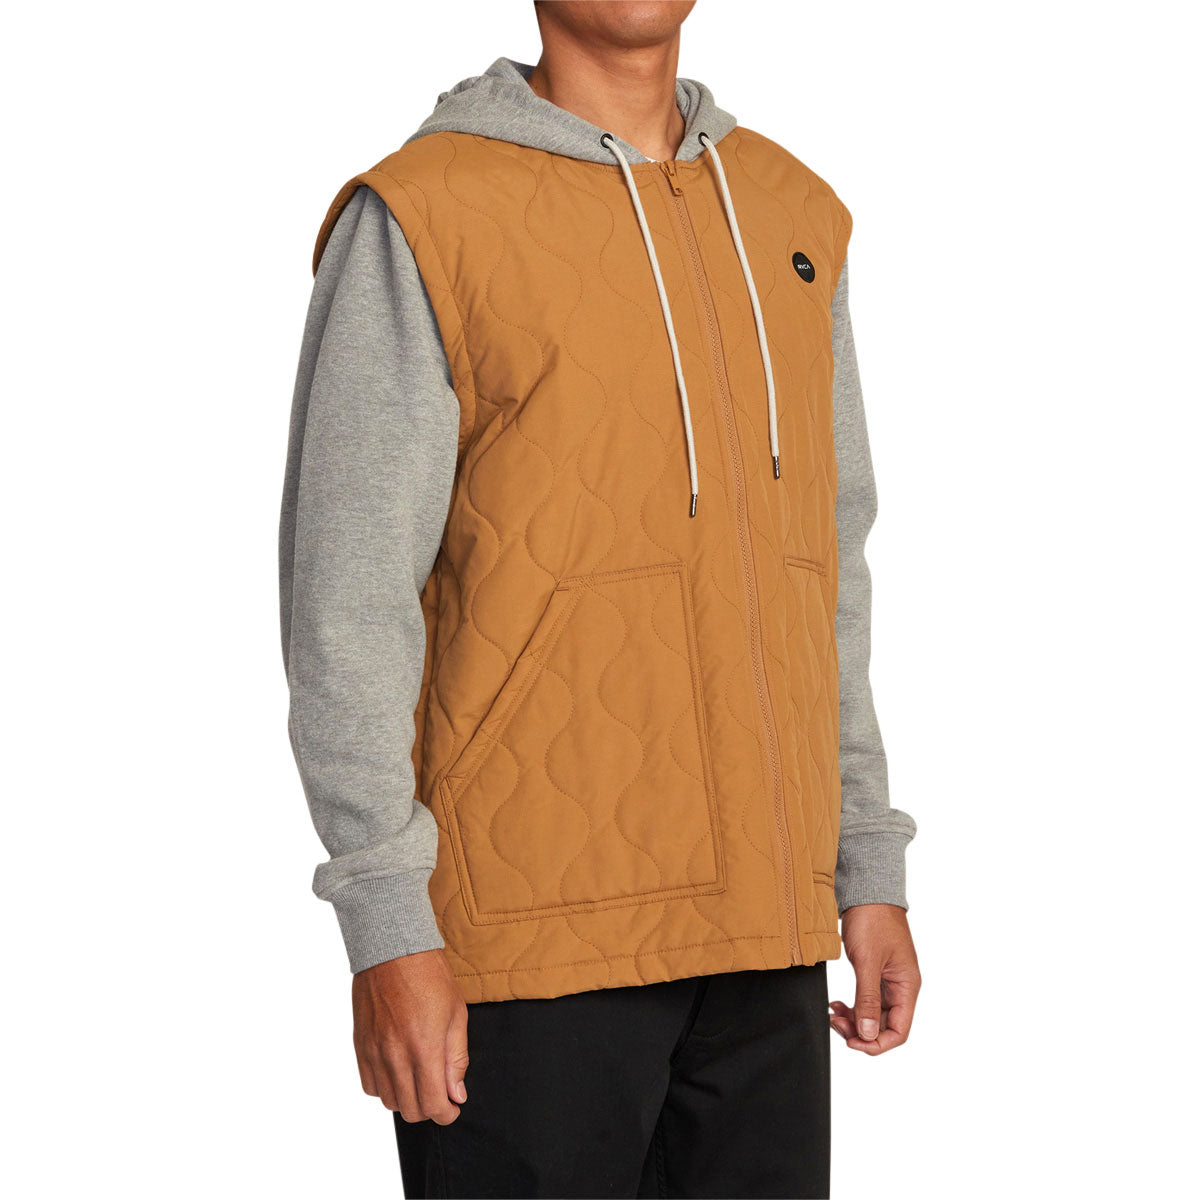 RVCA Grant Puffer Jacket - Camel image 5